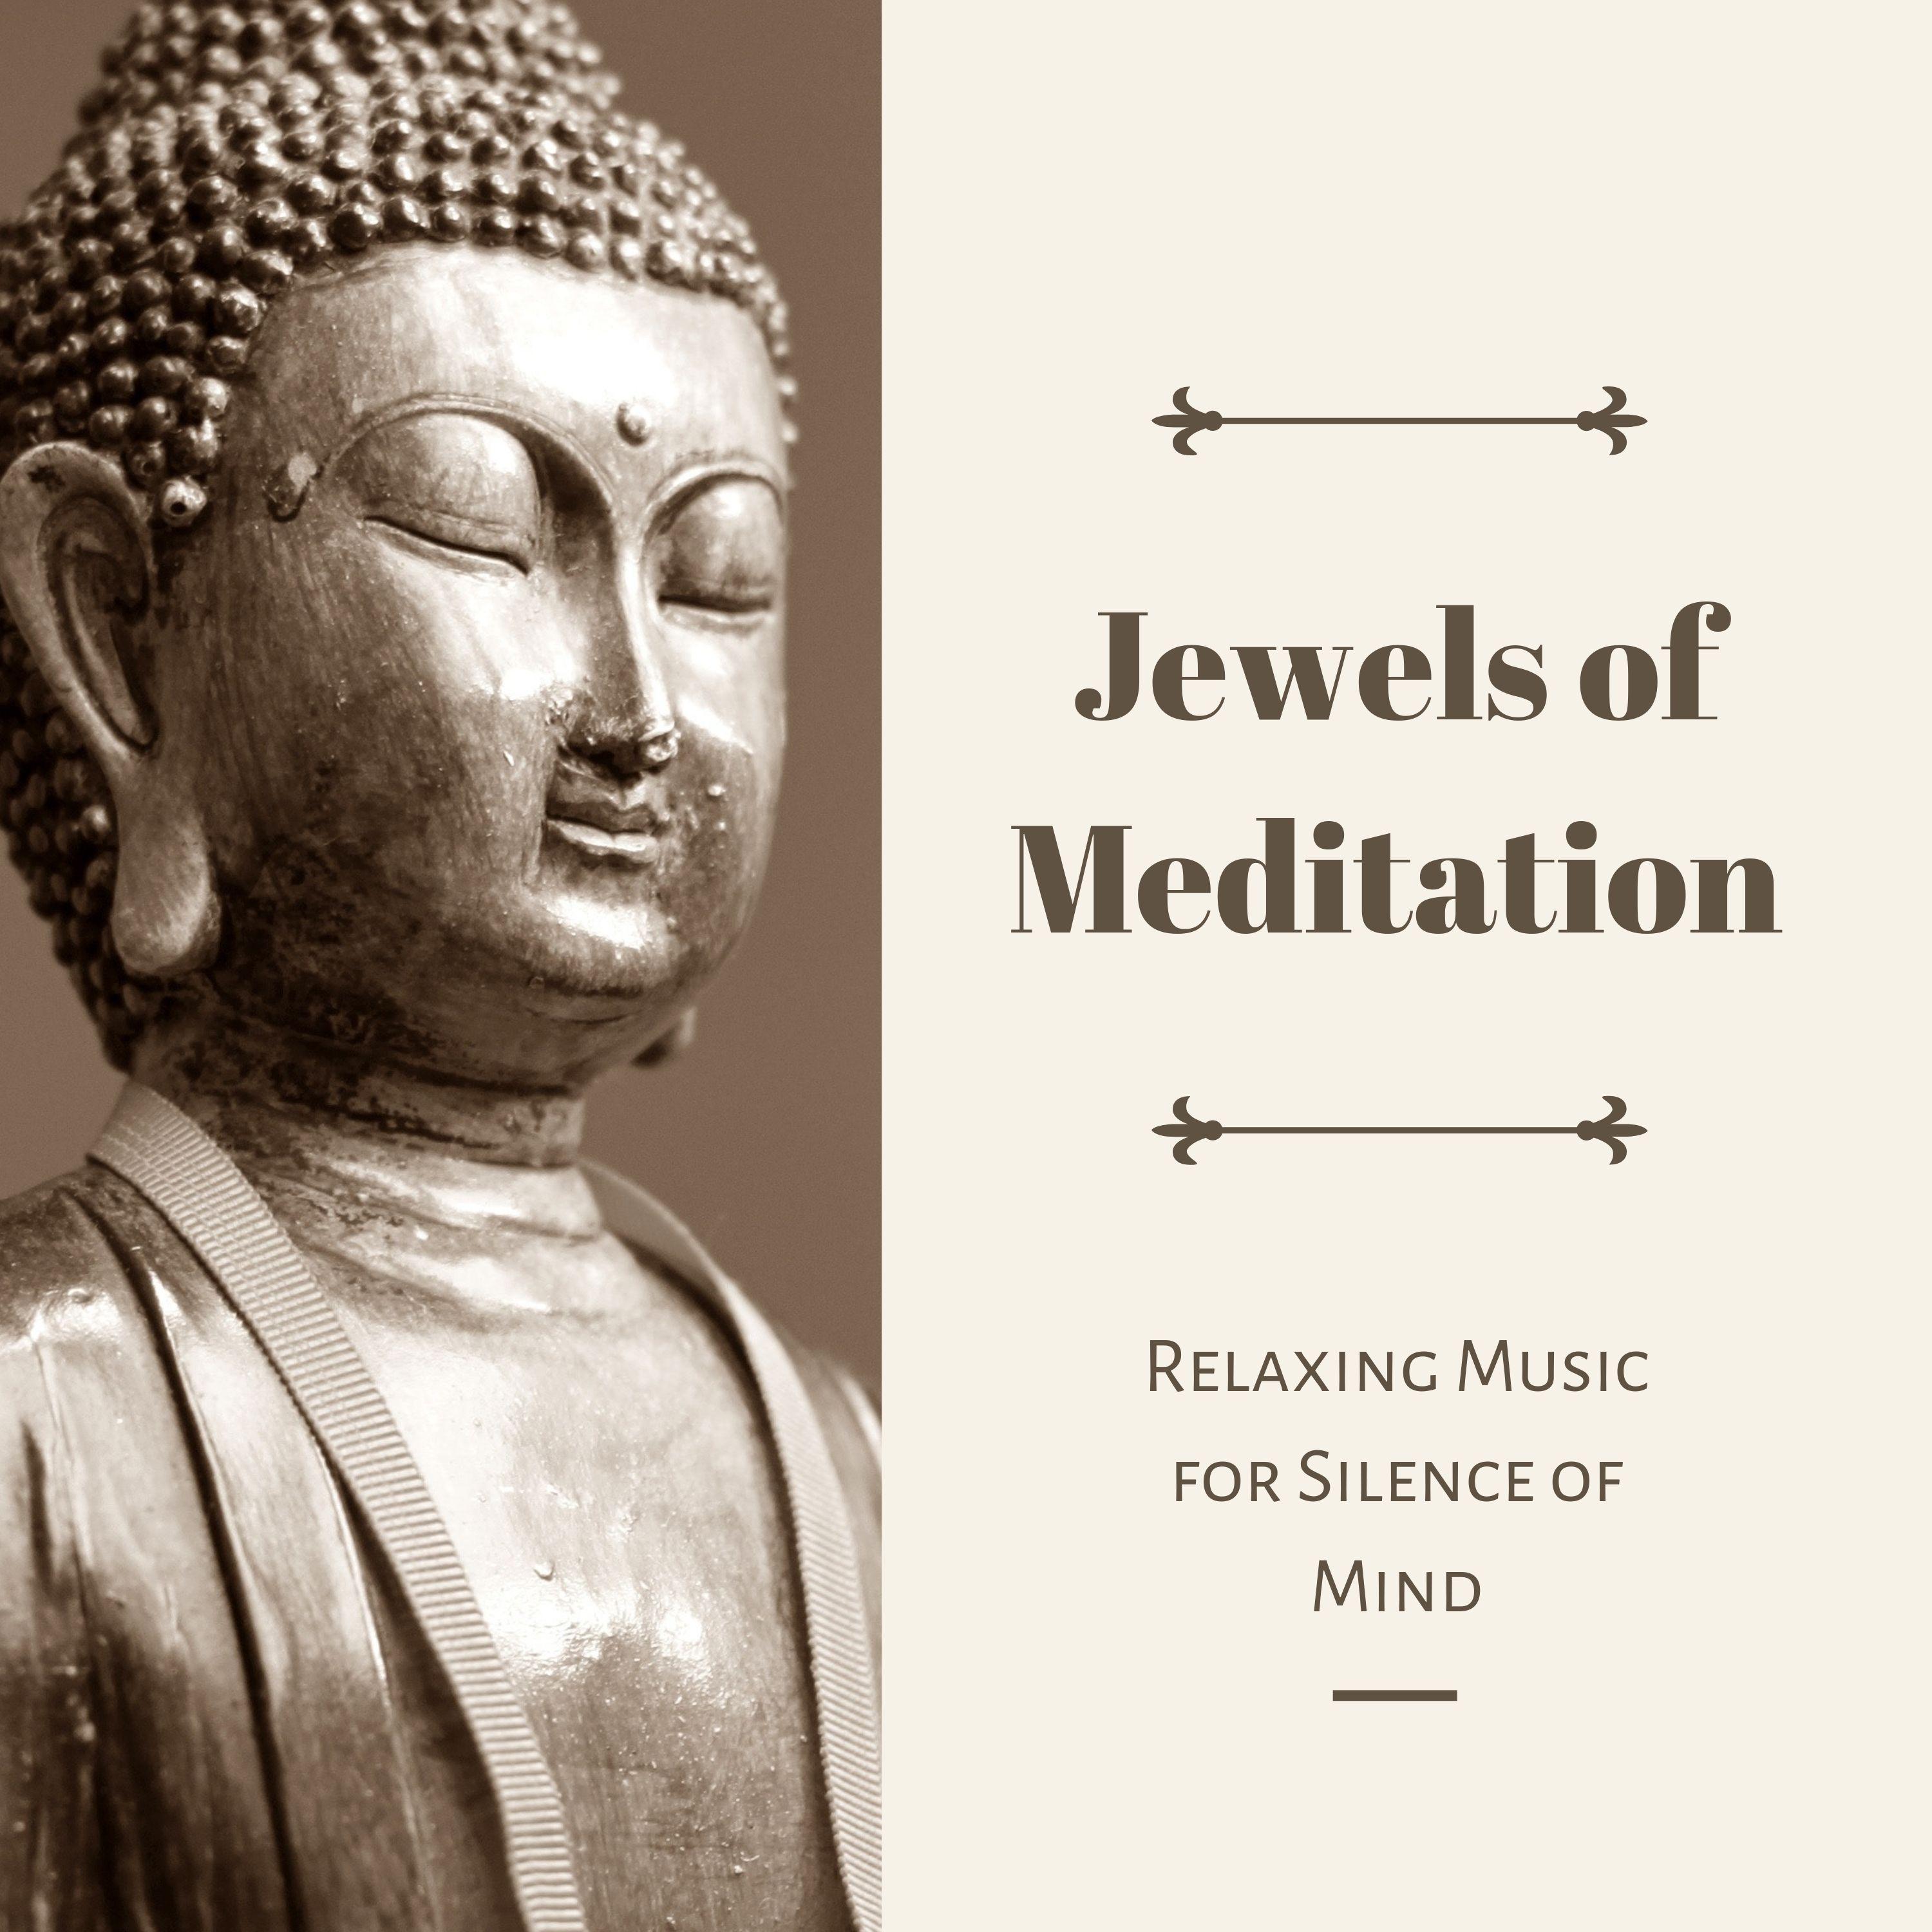 Jewels of Meditation - Relaxing Music for Silence of Mind